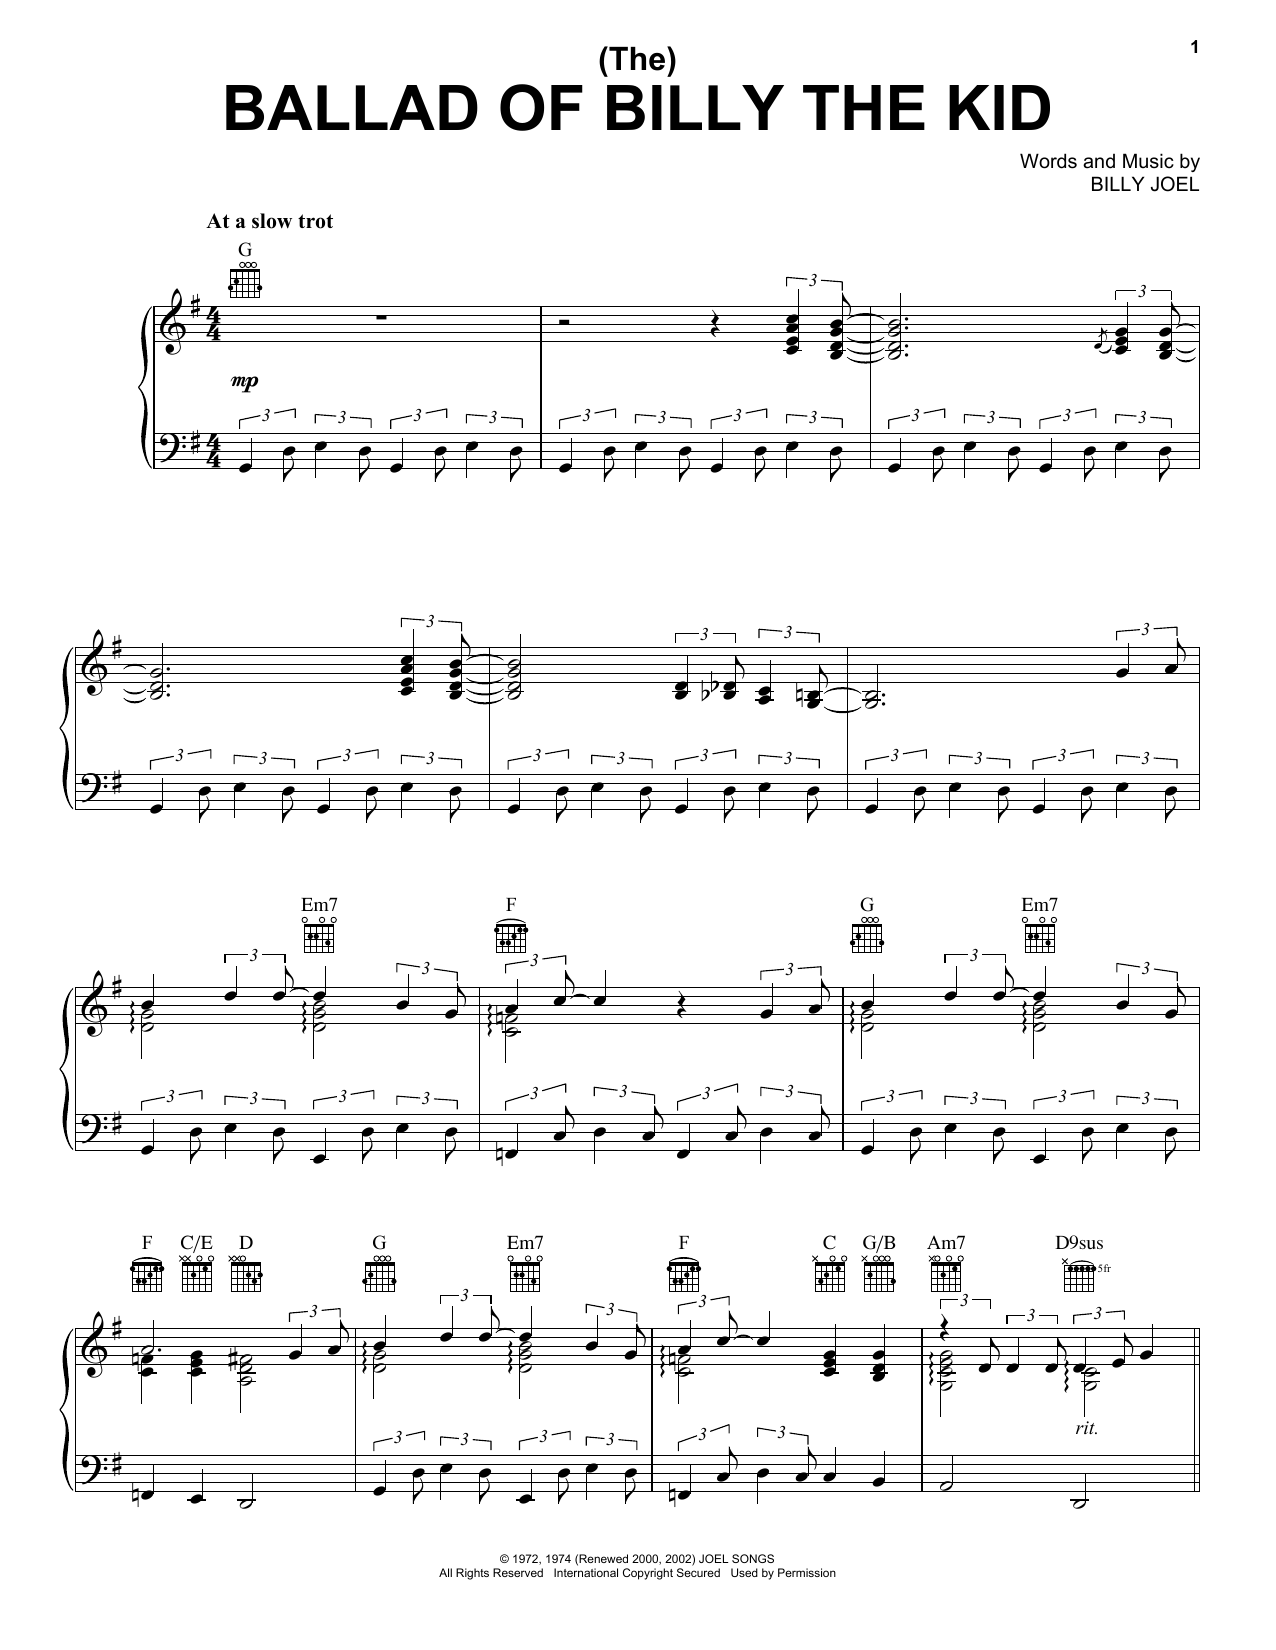 Download Billy Joel (The) Ballad Of Billy The Kid Sheet Music